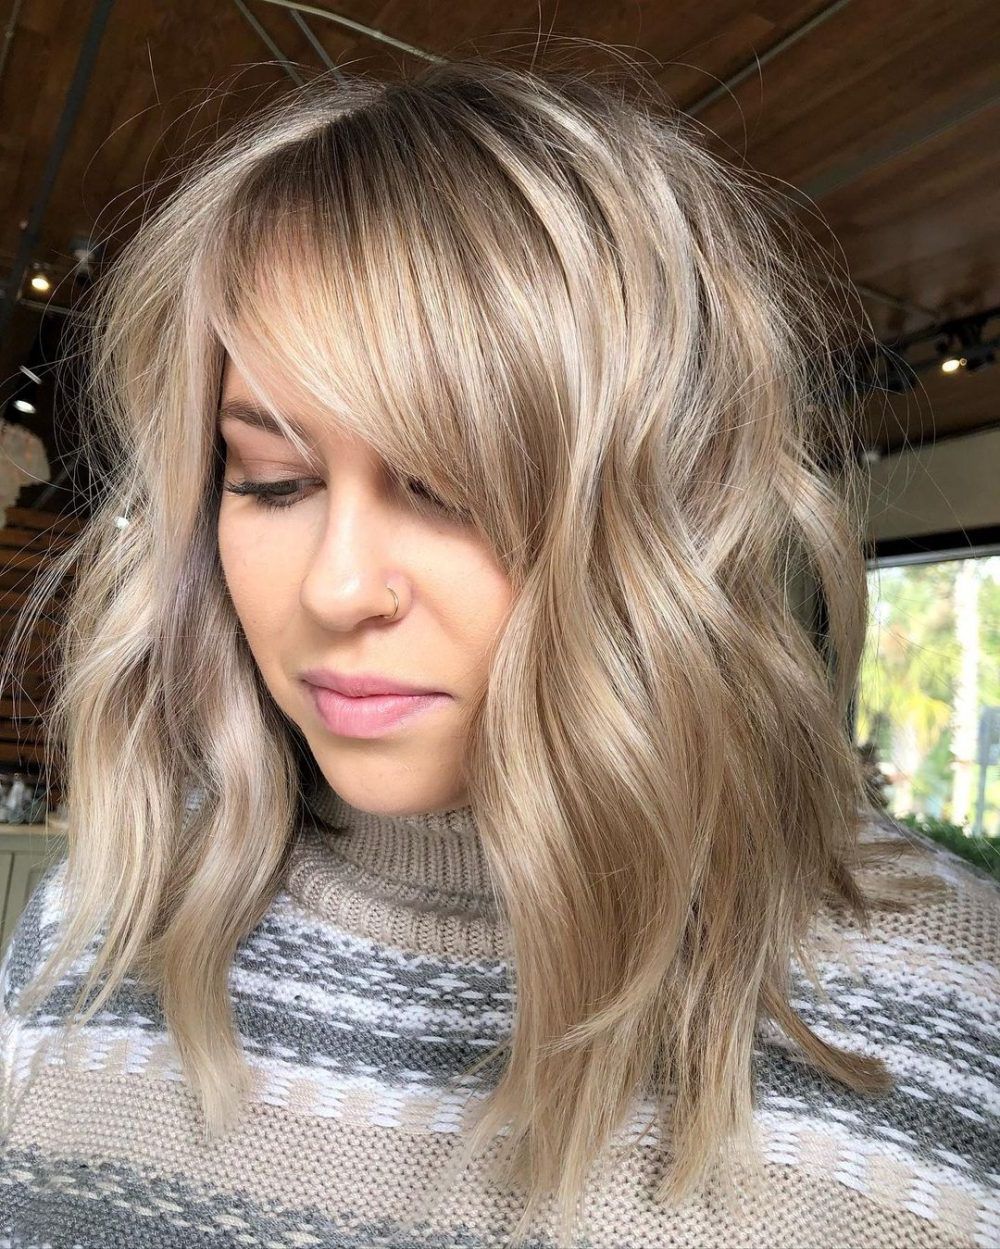 63 Side Swept Bangs To Try When You're Bored With Your Hair | Hair Lengths,  Bangs With Medium Hair, Side Bangs Hairstyles Throughout Most Recent Highlighted Hair With Side Bangs (Photo 15 of 18)